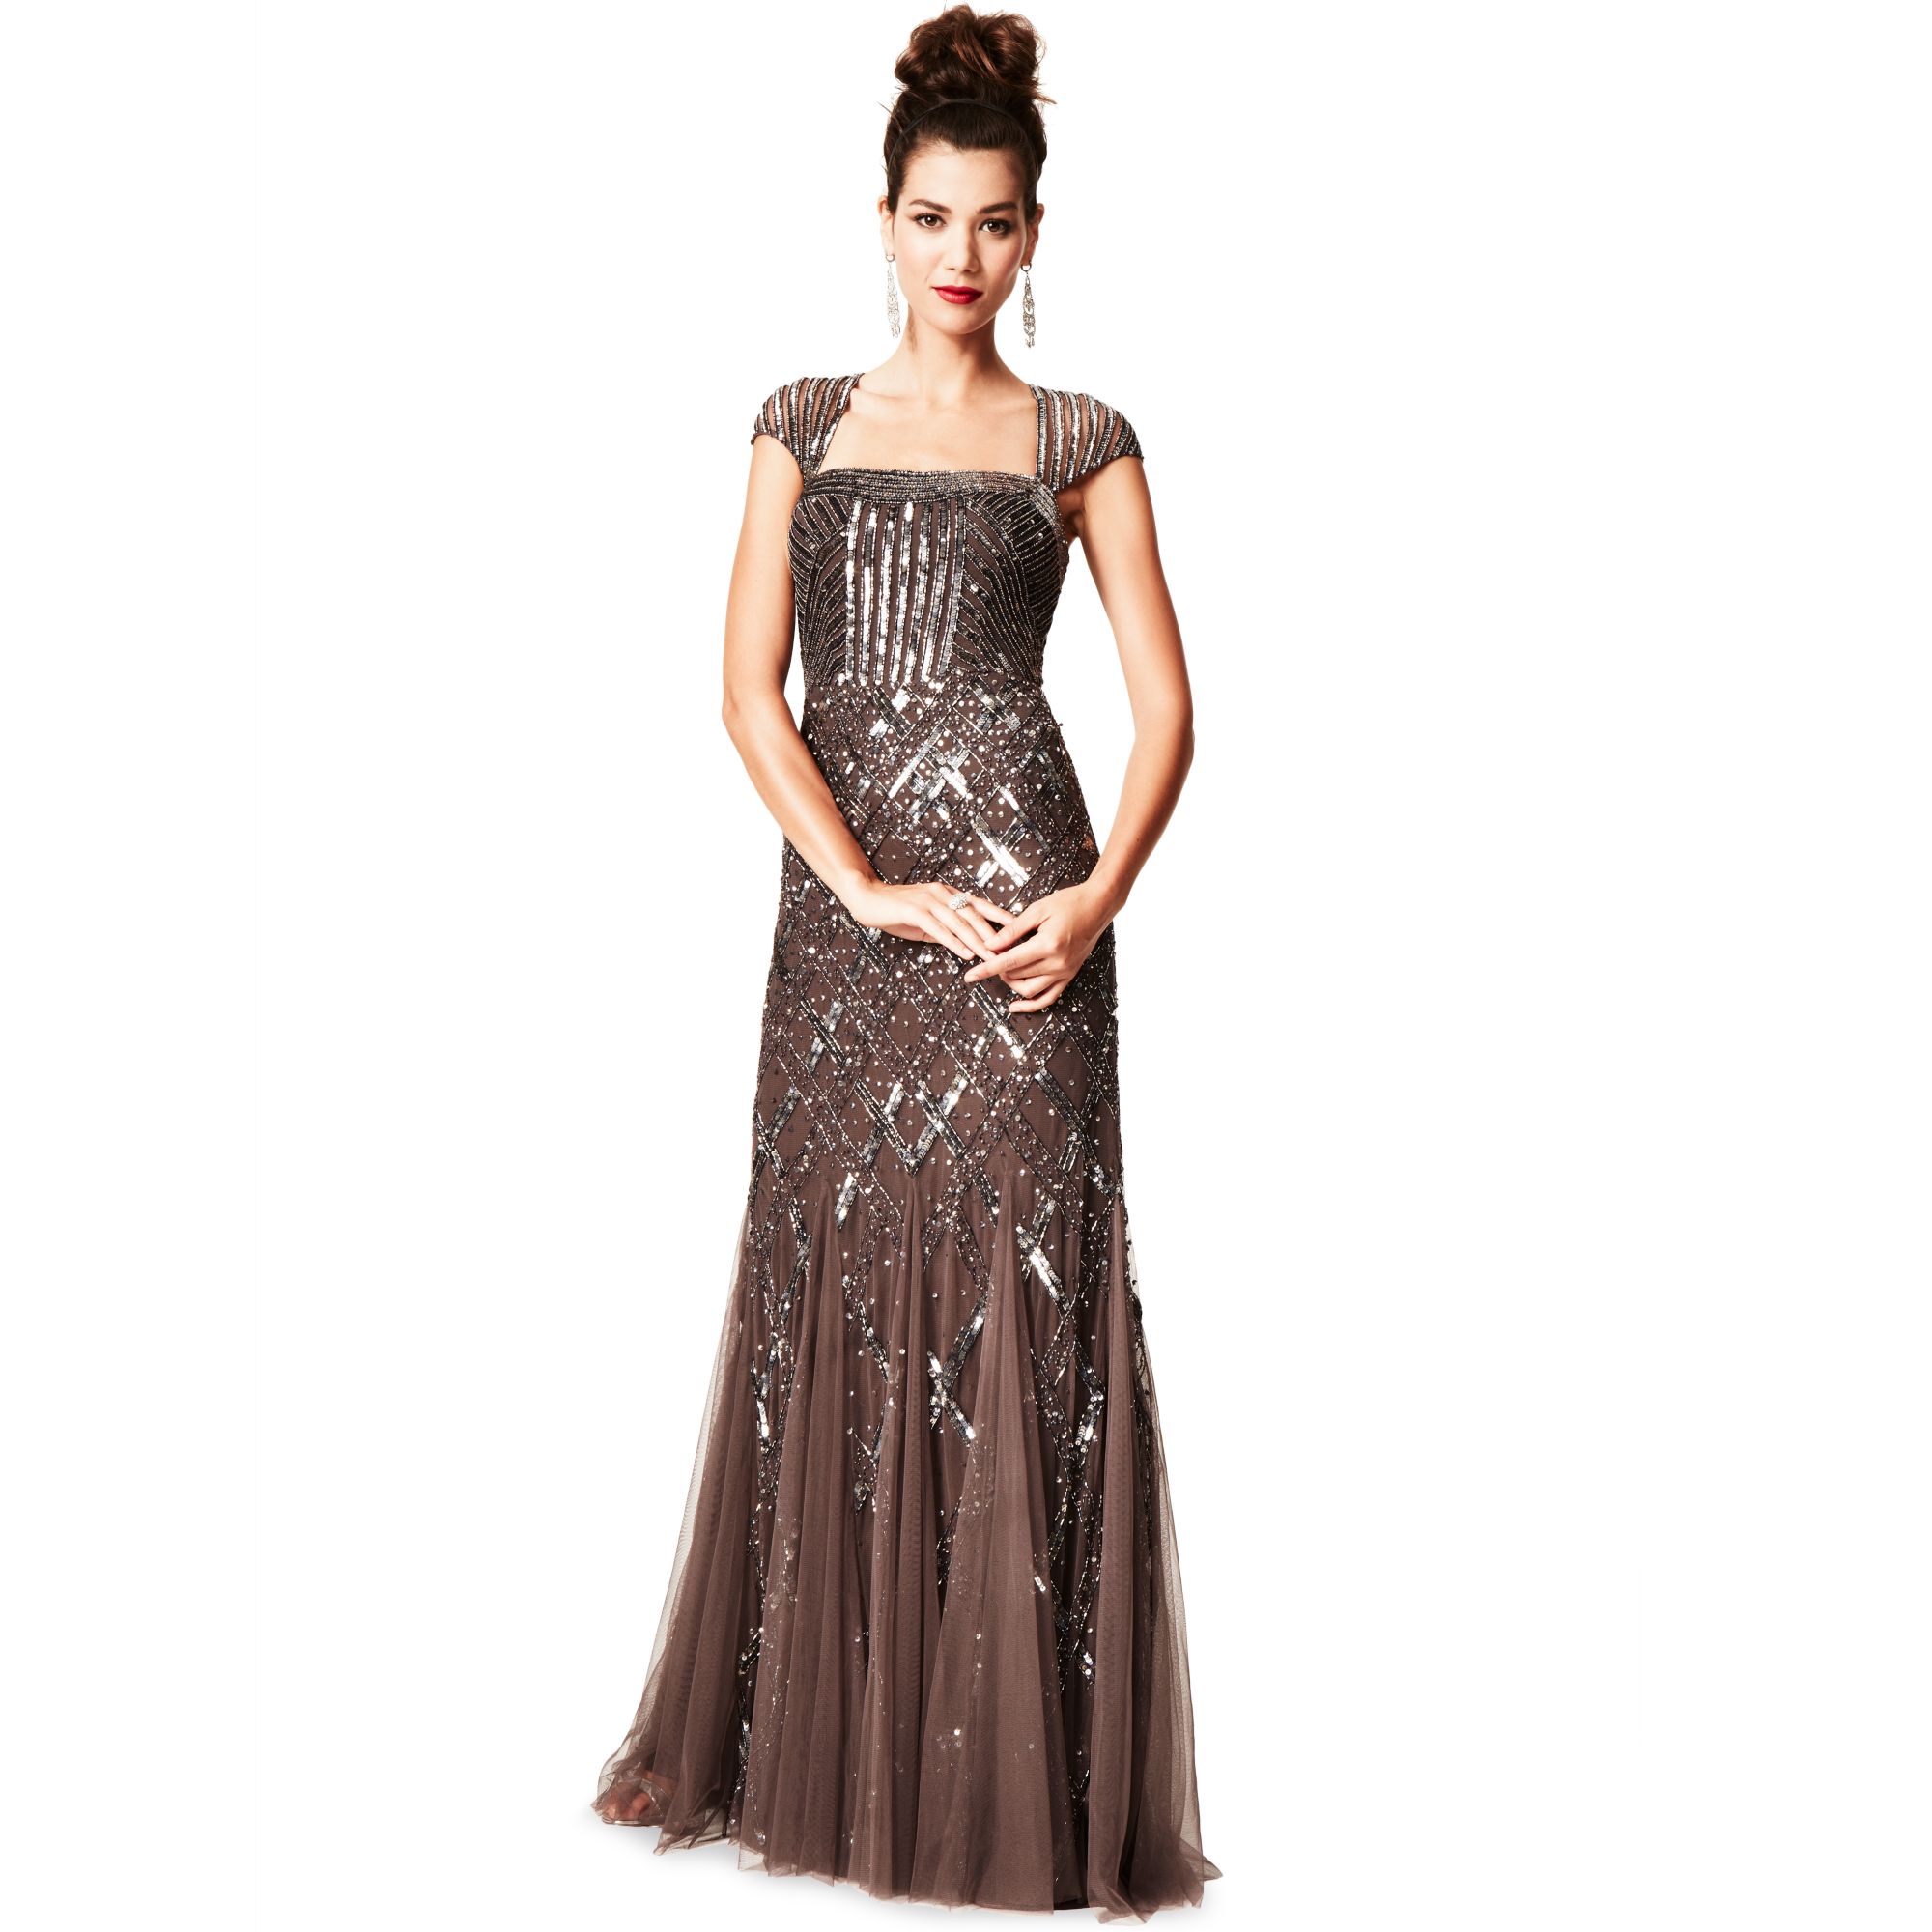 Adrianna Papell Cap Sleeve Sequined Beaded Gown Dress in Graphite (Purple)  | Lyst